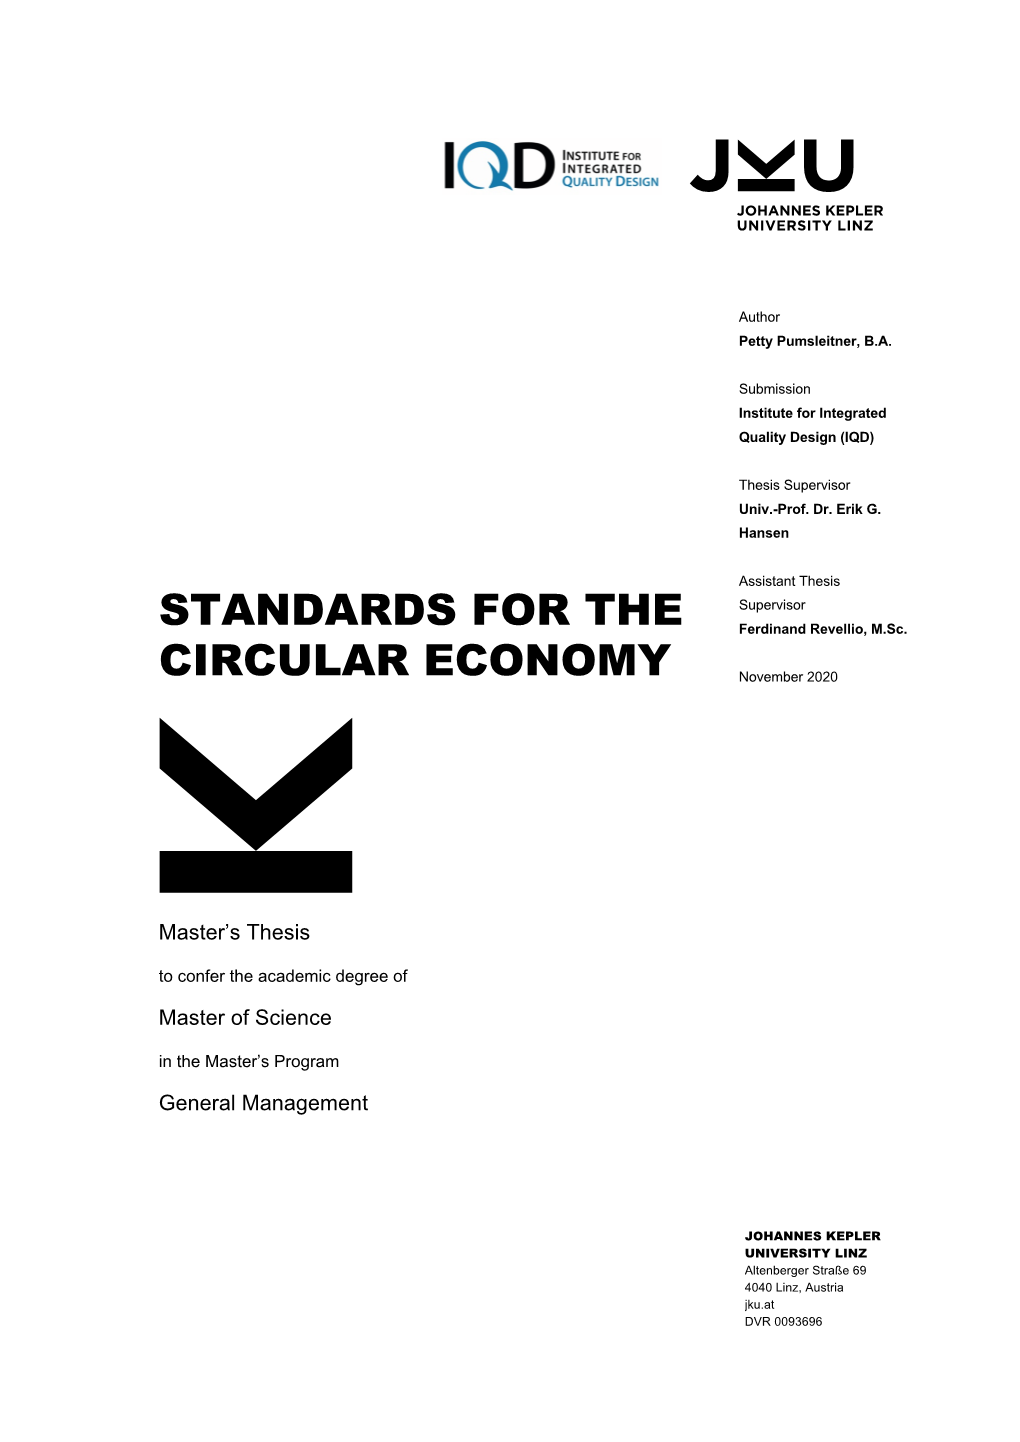 Standards for the Circular Economy